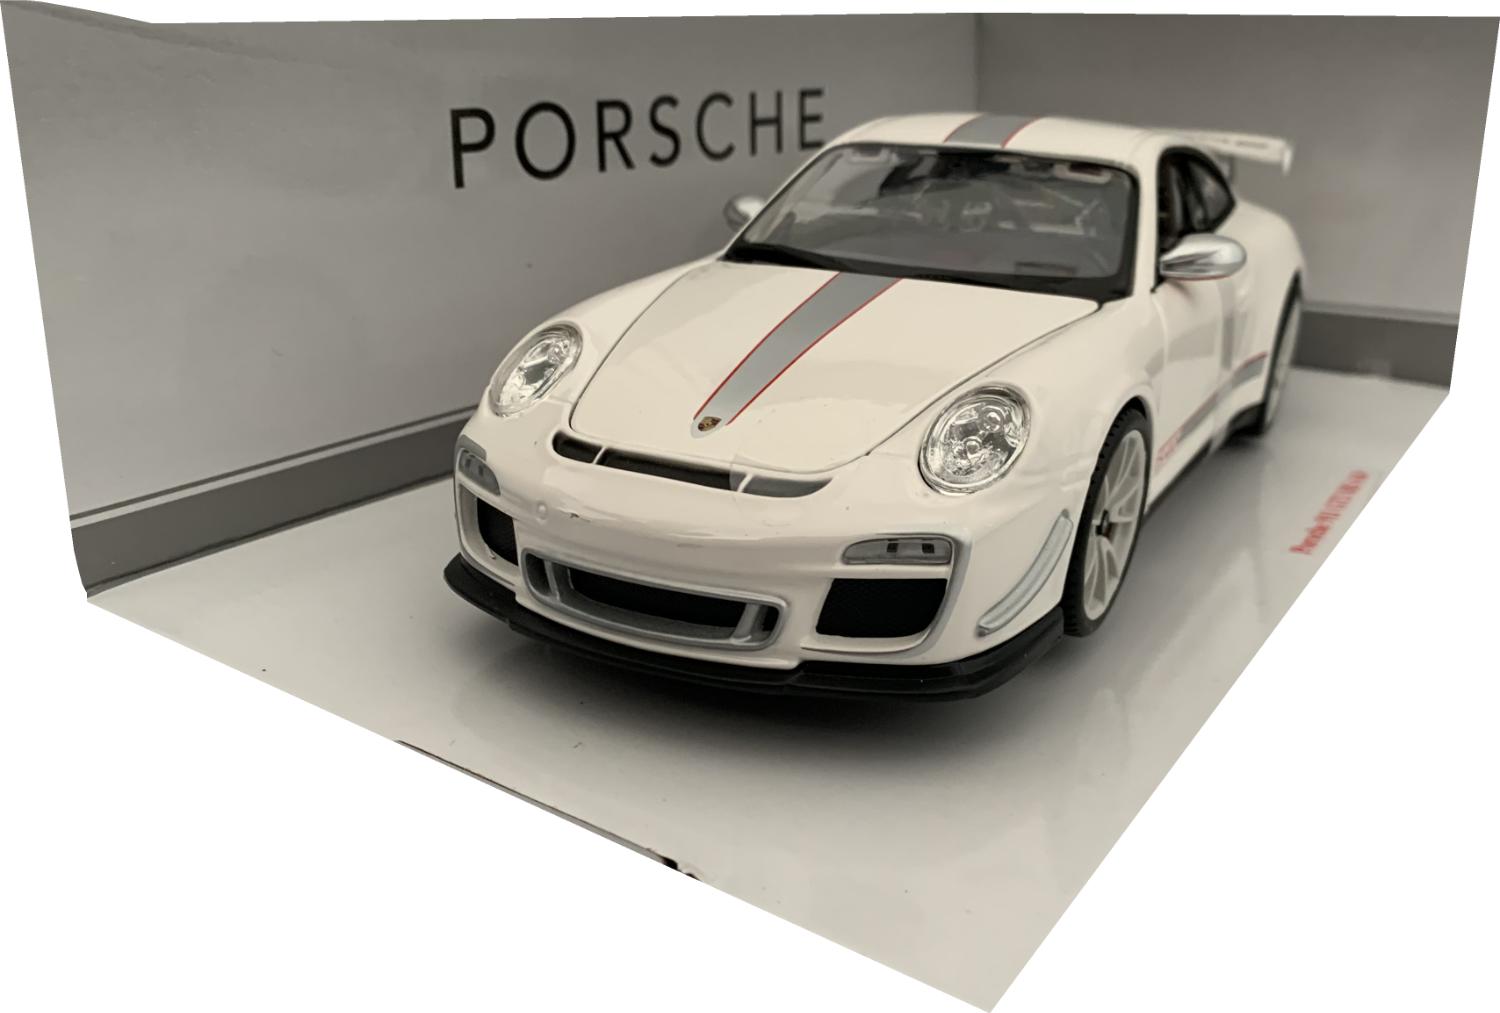 A very good representation of the Porsche 911 GT3 RS 4.0 decorated in white, silver and red strip graphics, matt silver door mirrors and white wheels